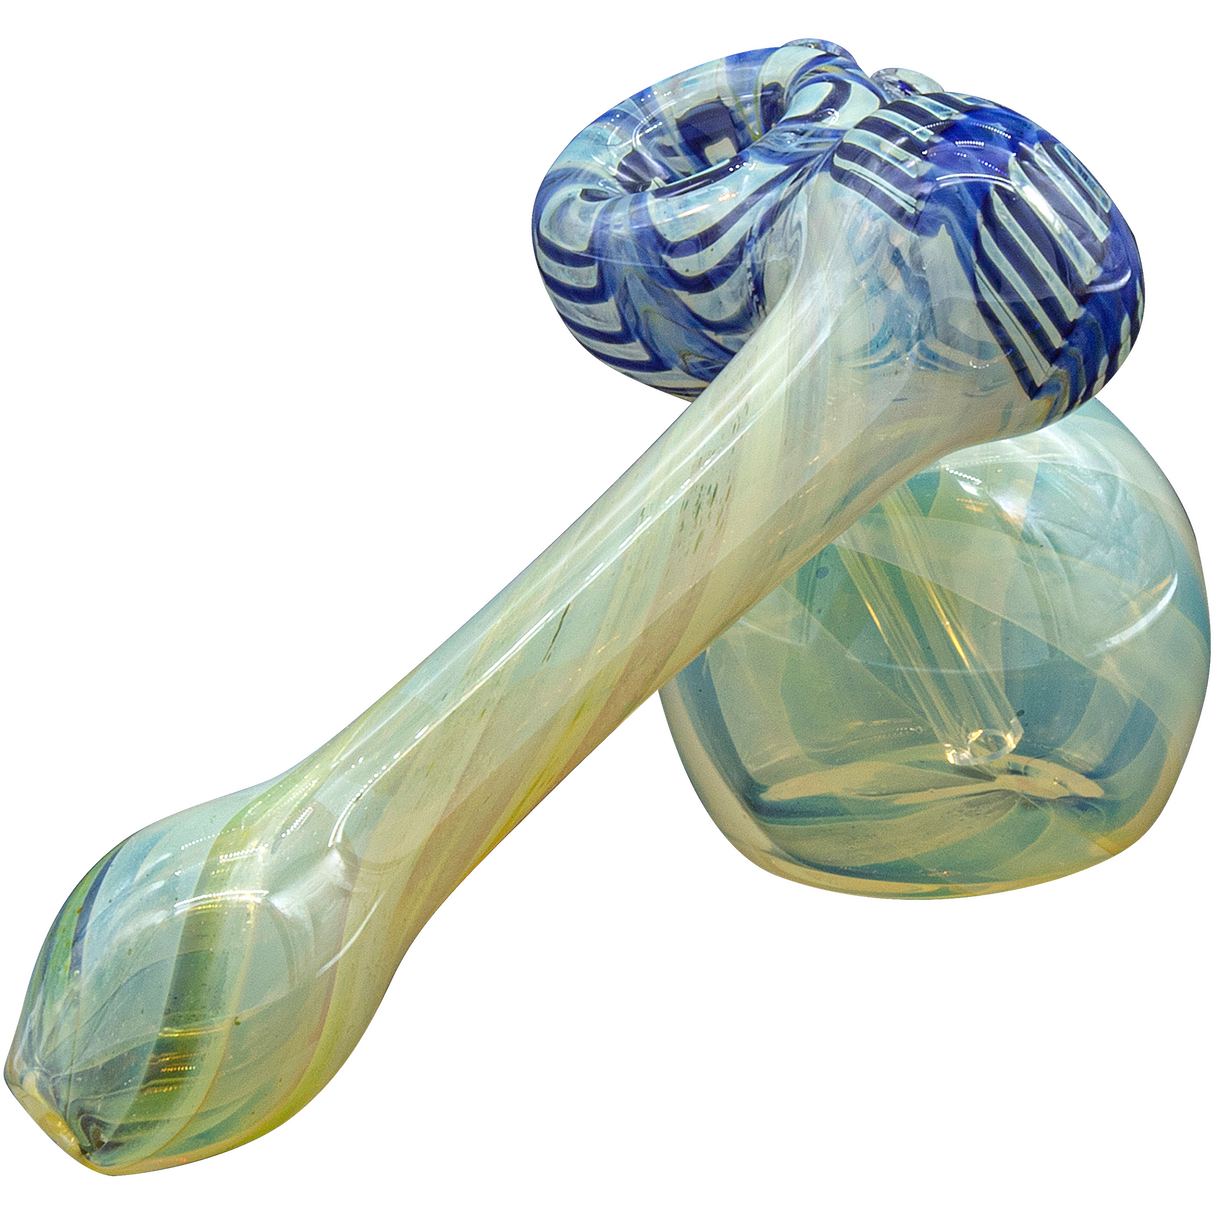 LA Pipes Raked Sidecar Bubbler in Fumed Glass with Blue Accents, Angled Side View